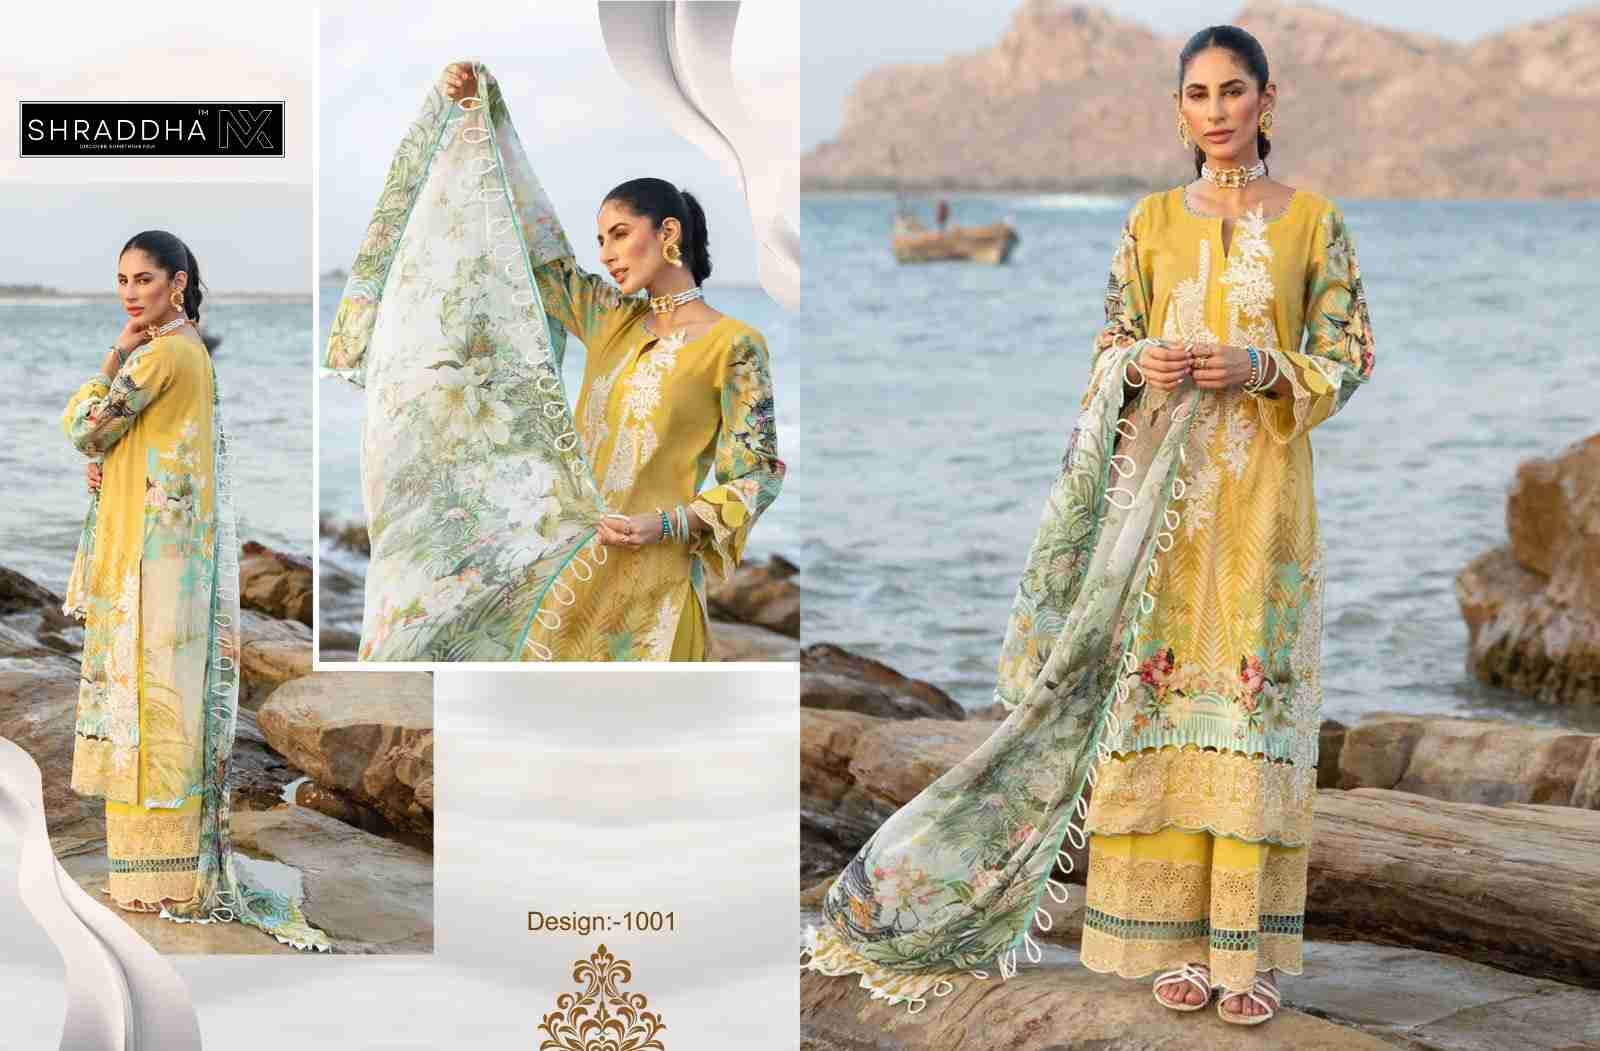 Shraddha Nx Queen Court Vol 1 NX Lawn Cotton With Embroidery Patch Work Chiffon Dupatta pakistani suits in surat - jilaniwholesalesuit